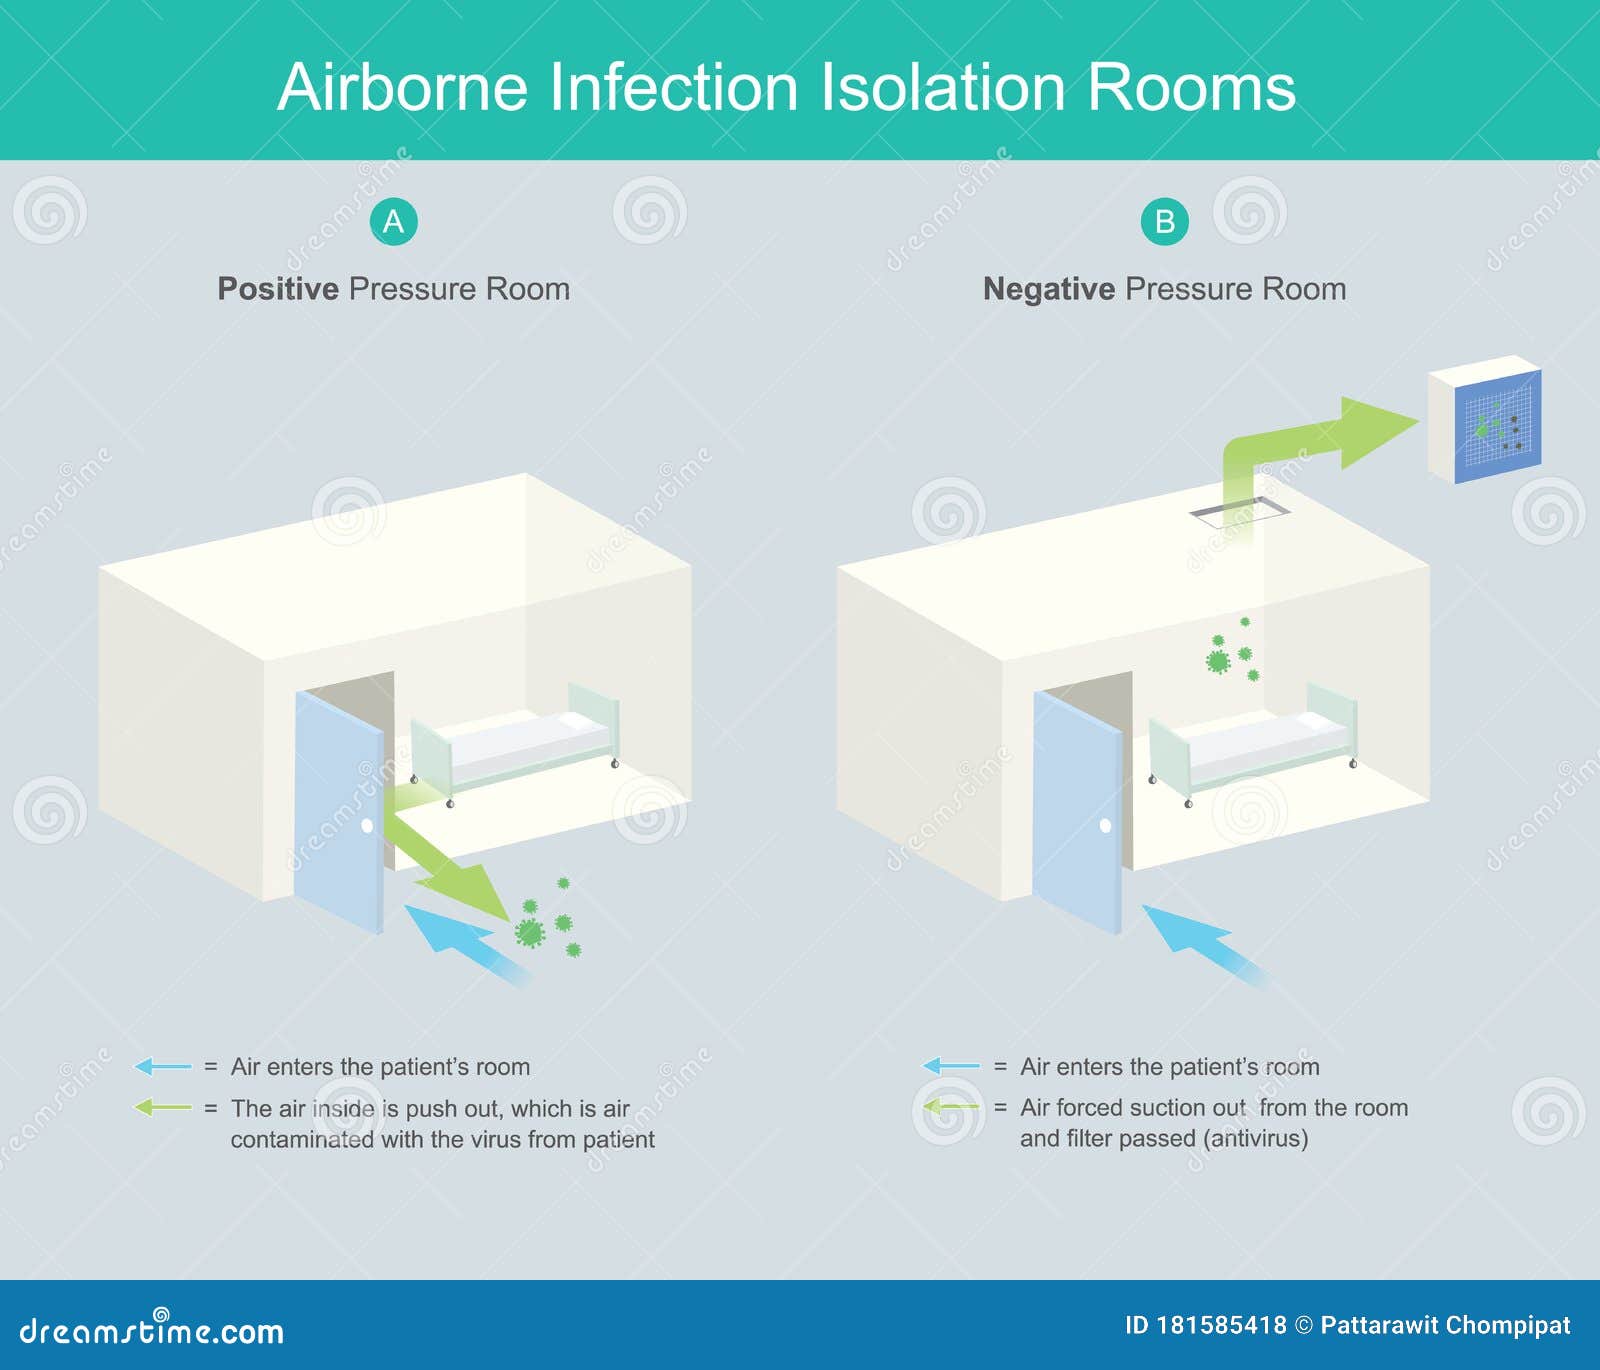 airborne infection isolation rooms.